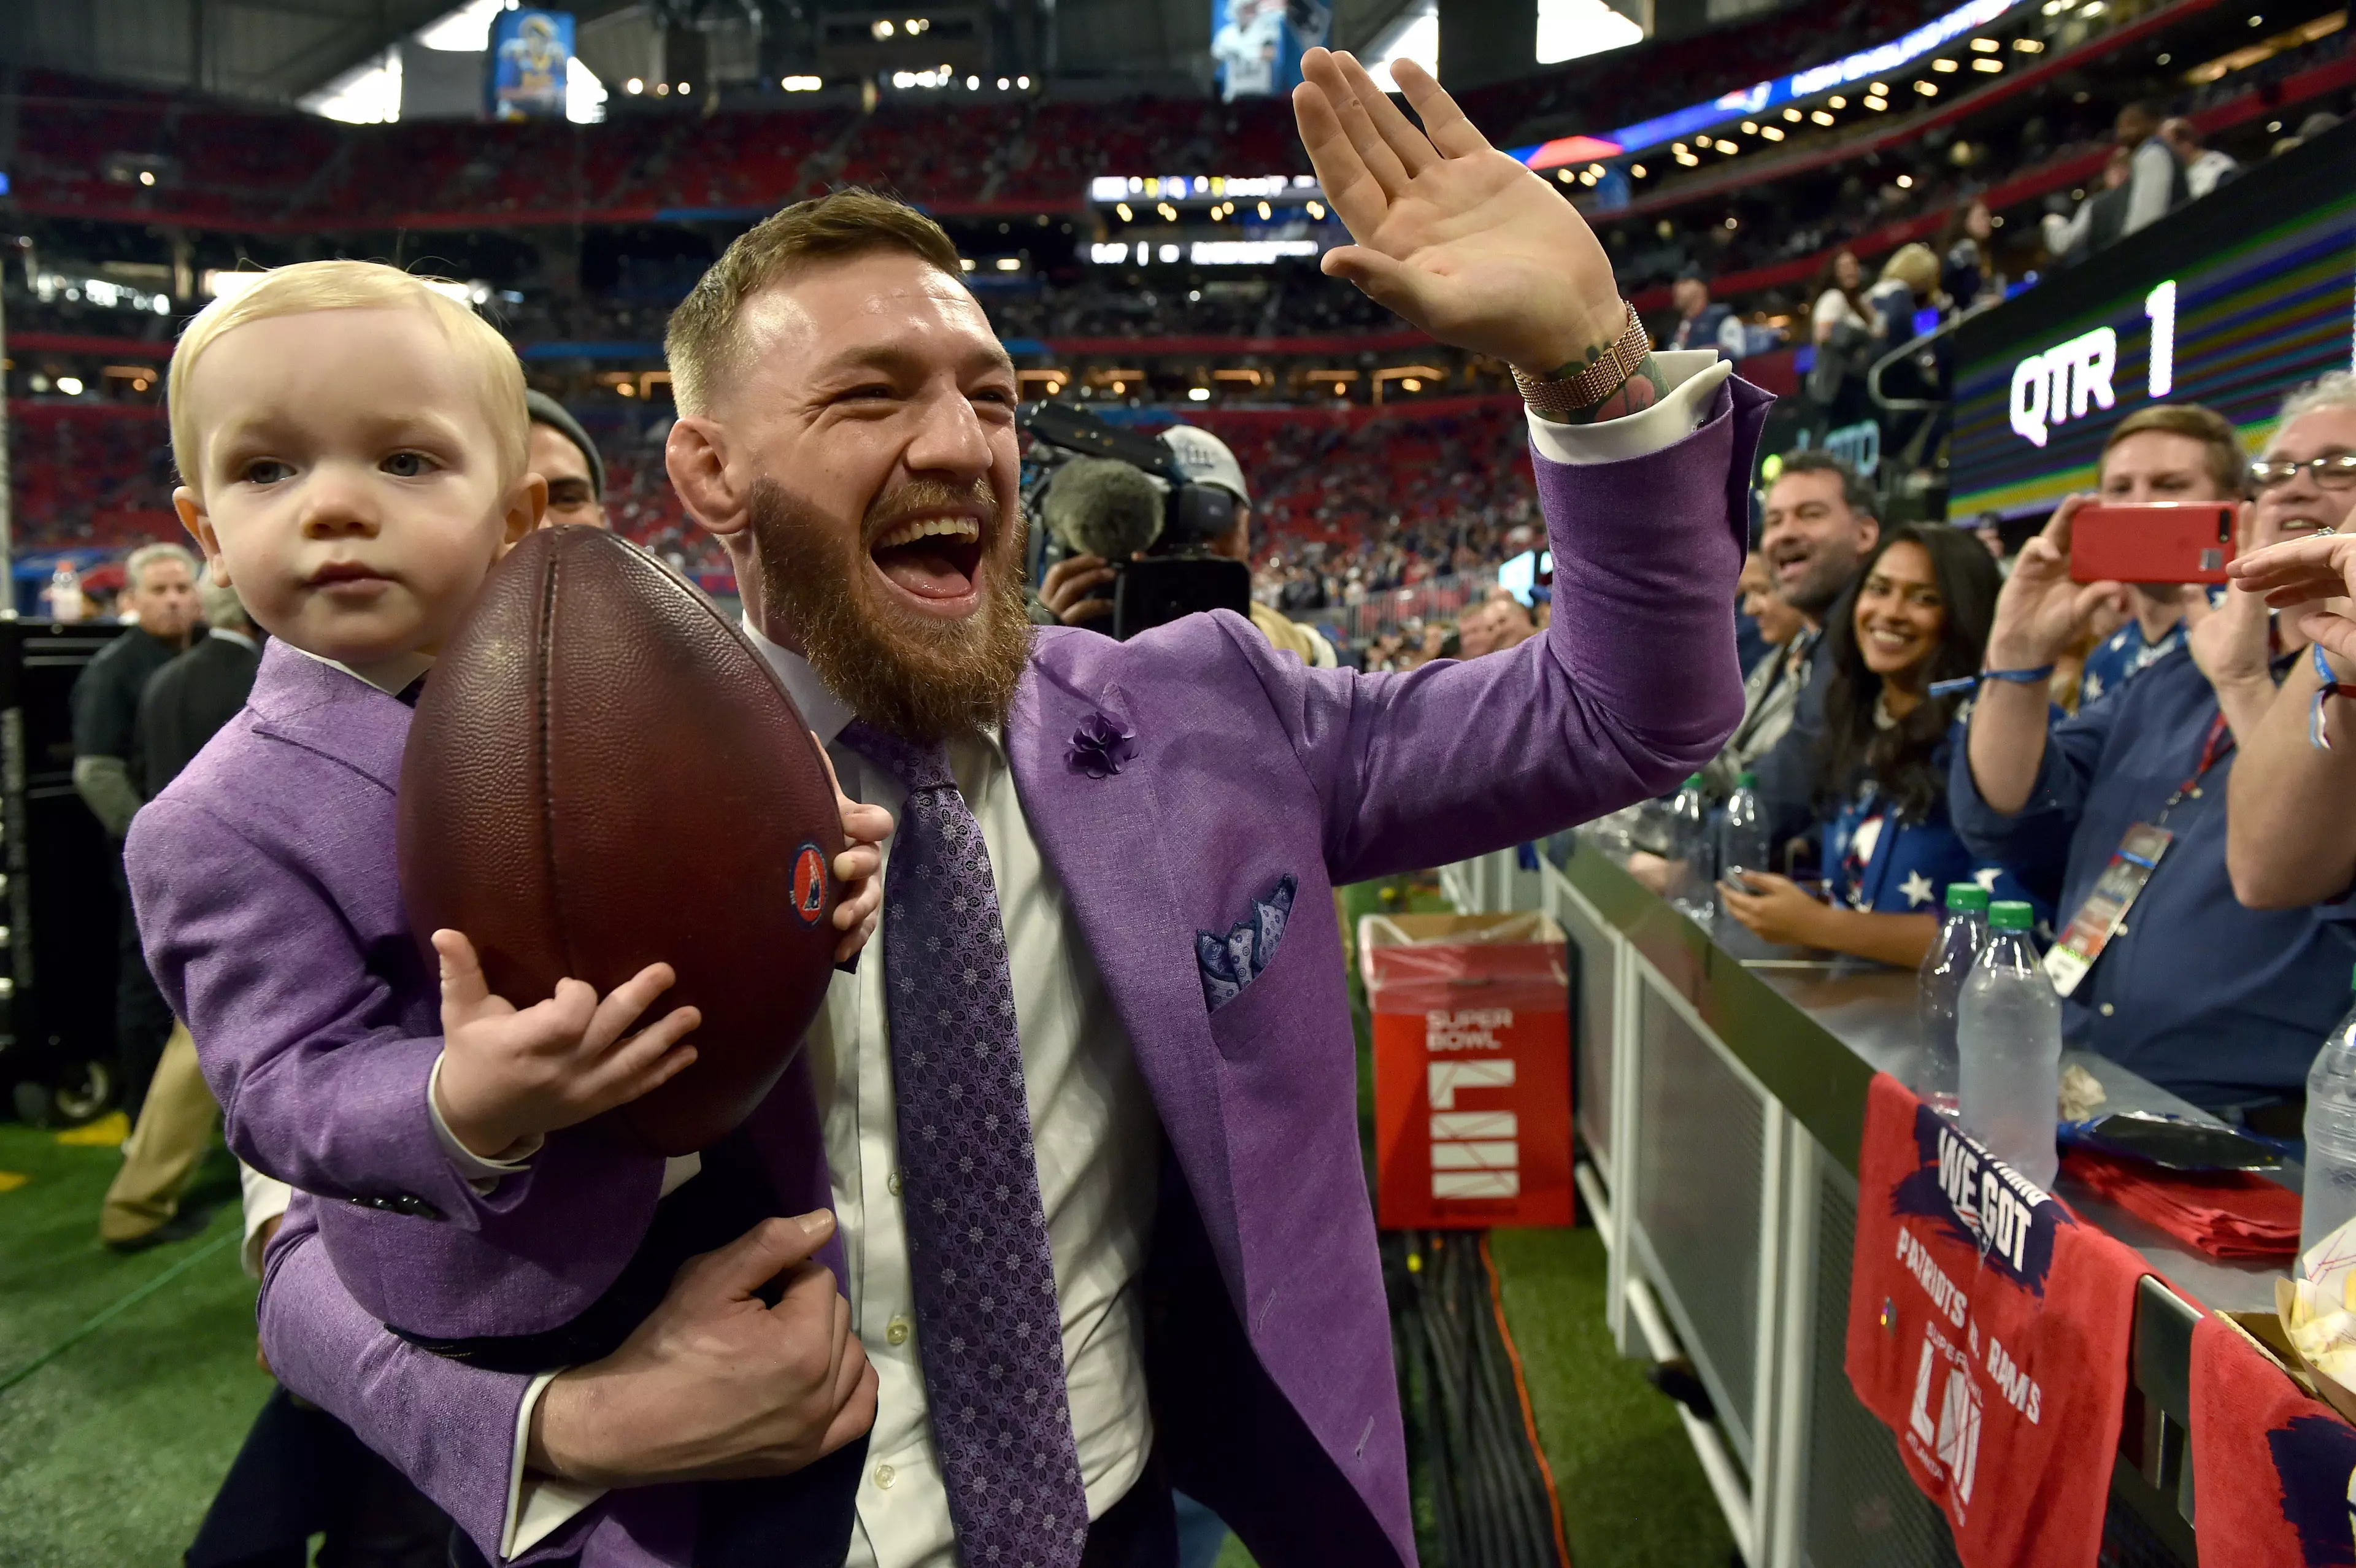 McGregor and his son at the Super Bowl earlier in 2019.